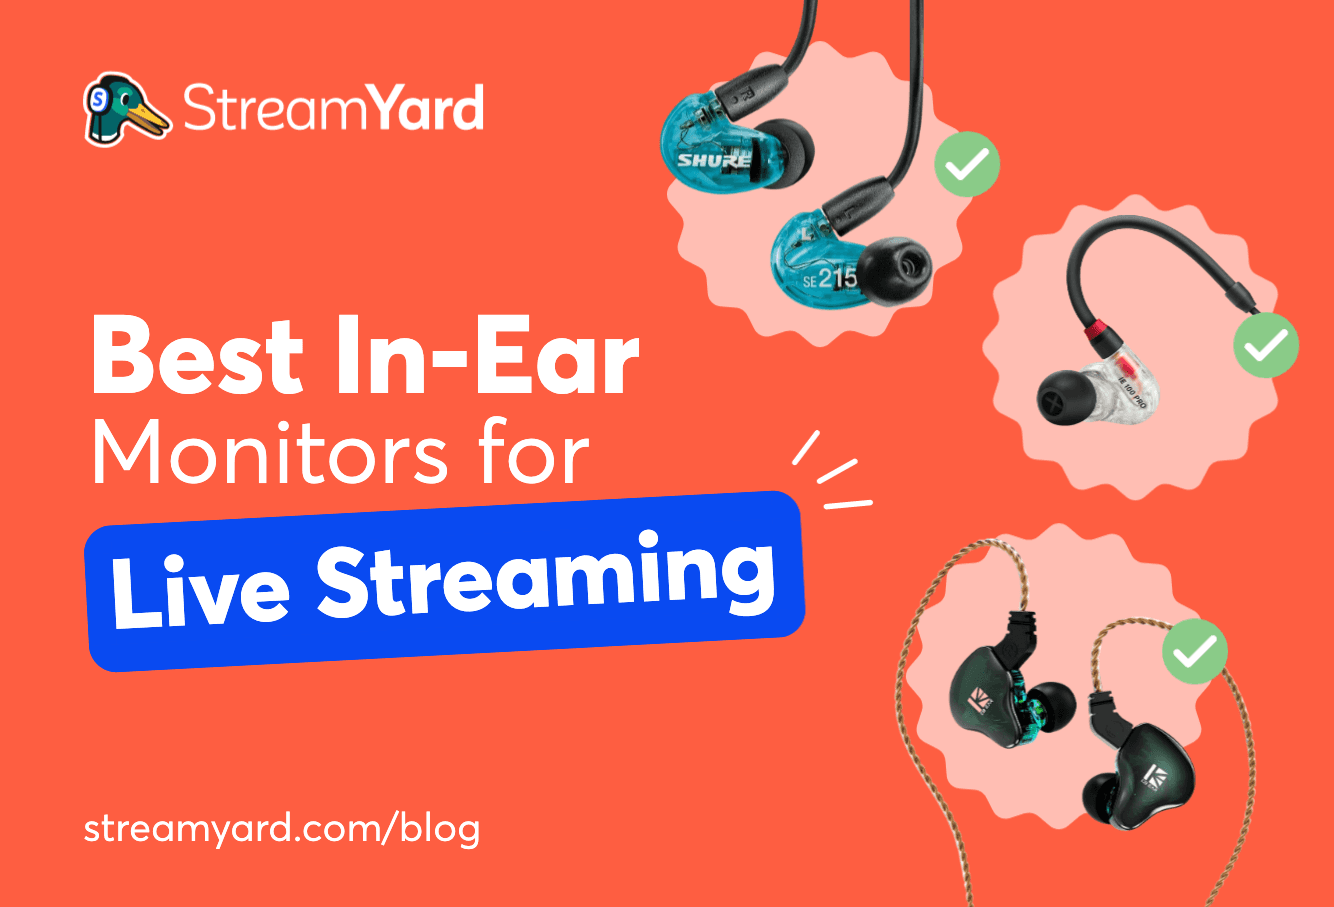 Here's a guide on the best in-ear monitors for live streaming. Check our top picks to enjoy excellent sound monitoring each time you go live.